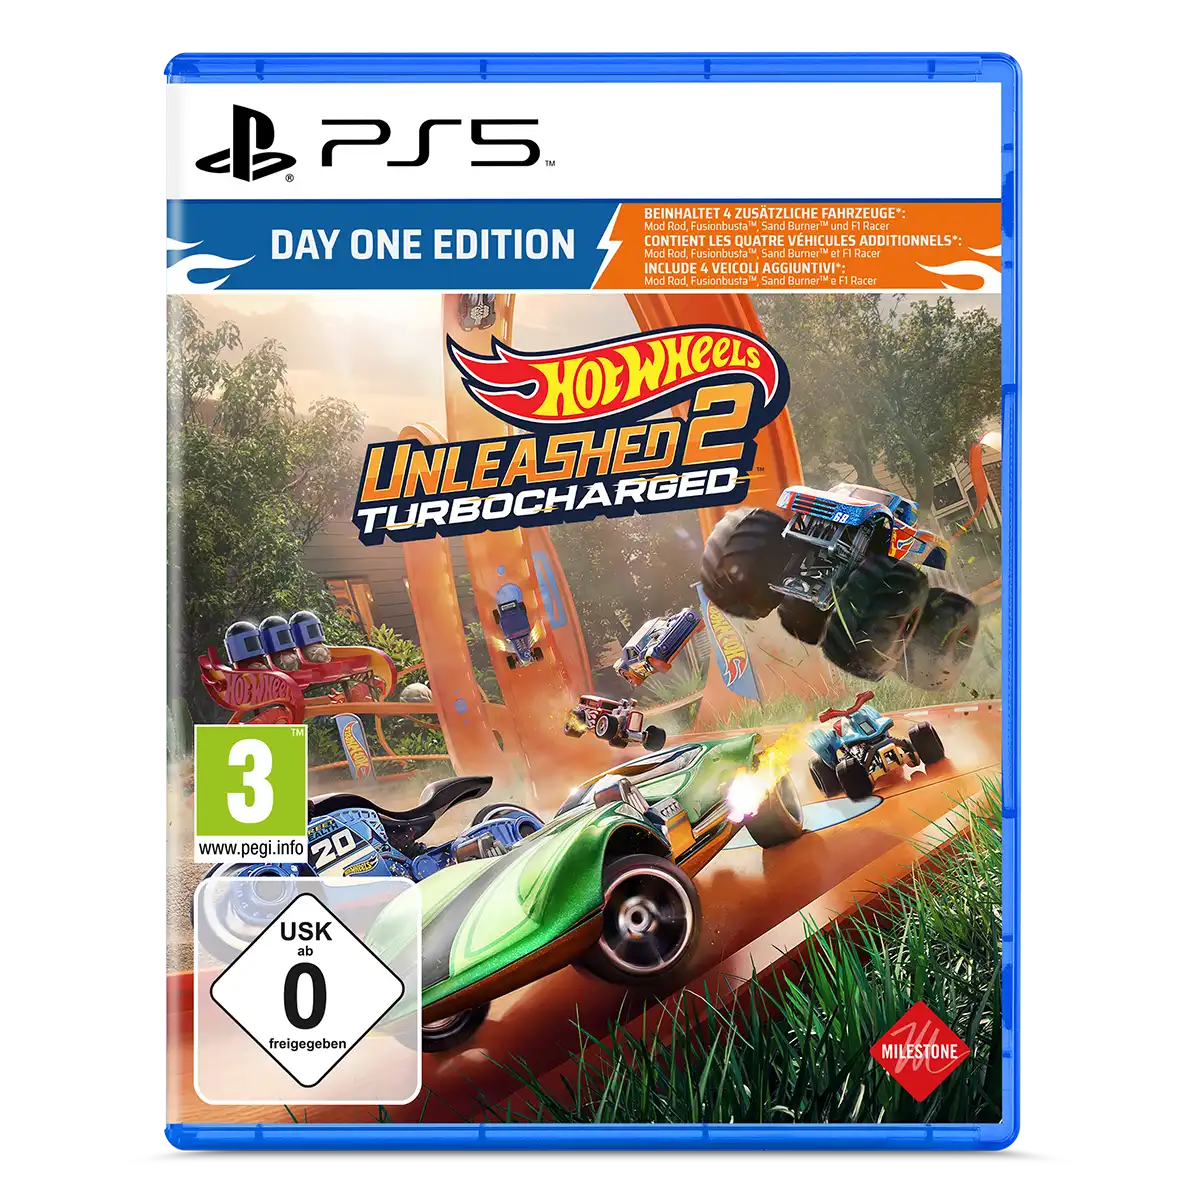 Hot Wheels Unleashed™ 2 Turbocharged Day One Edition (PS5) Thumbnail 1